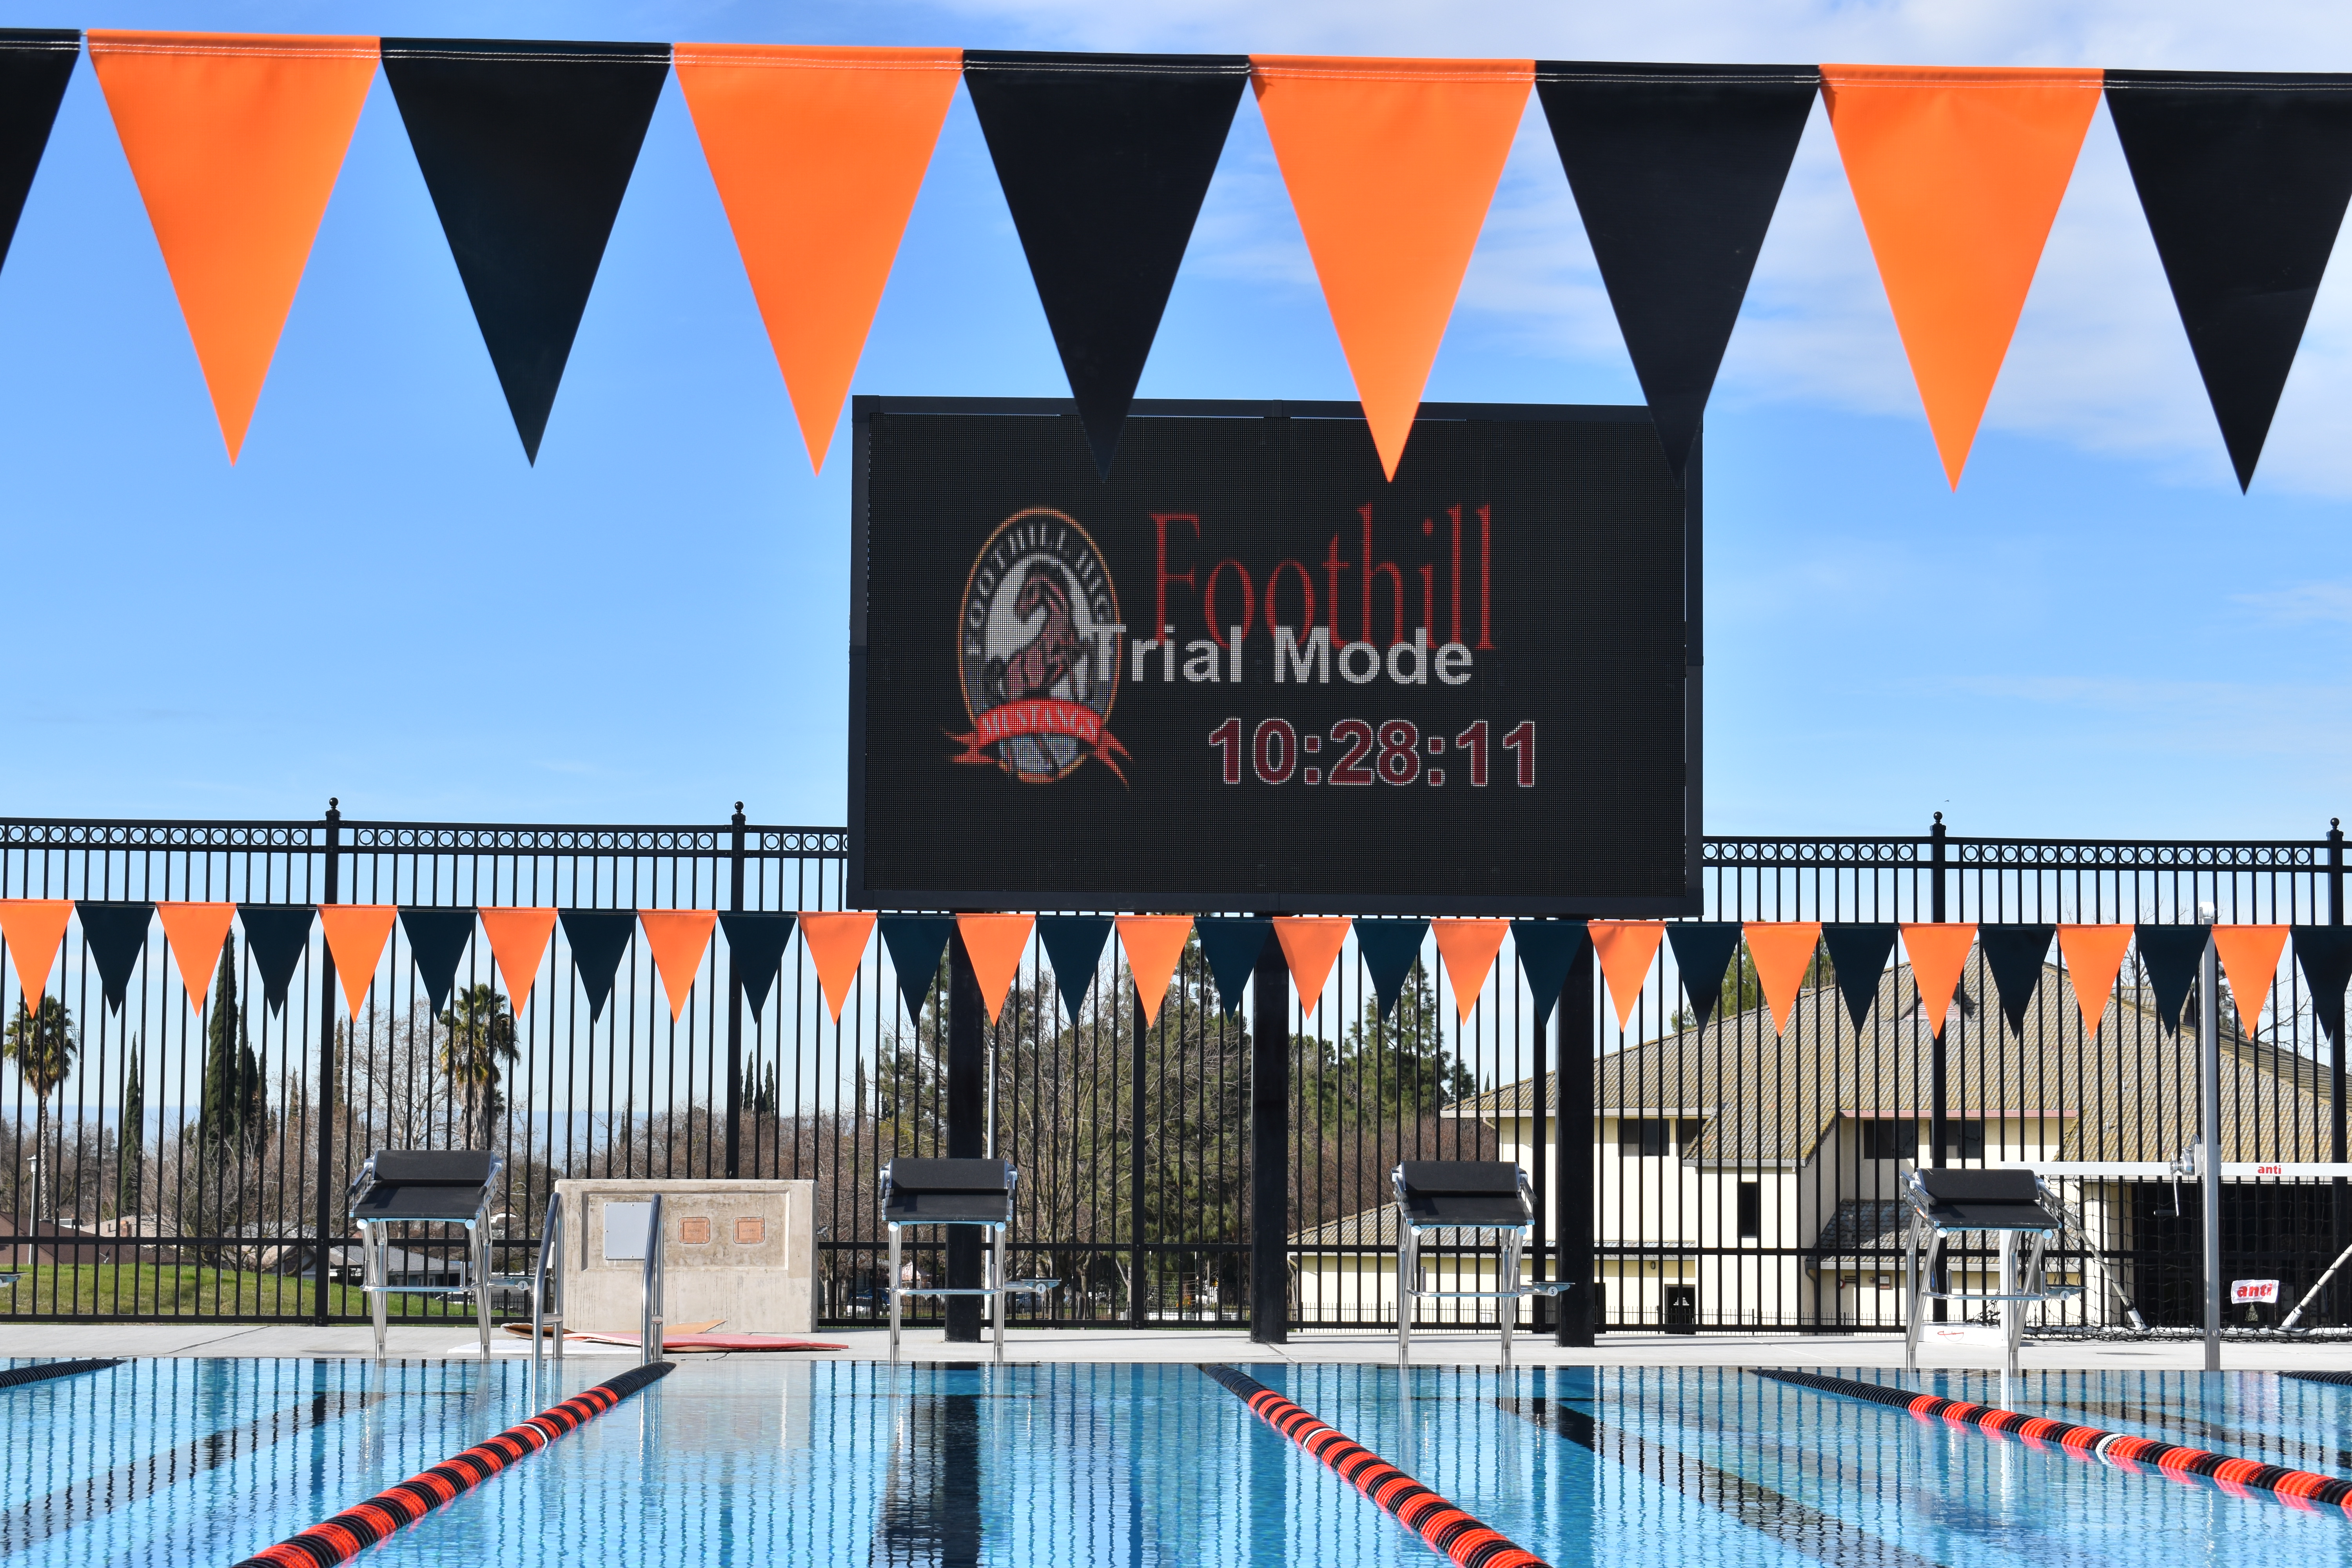 LED Video Scoreboard over new construction pool 